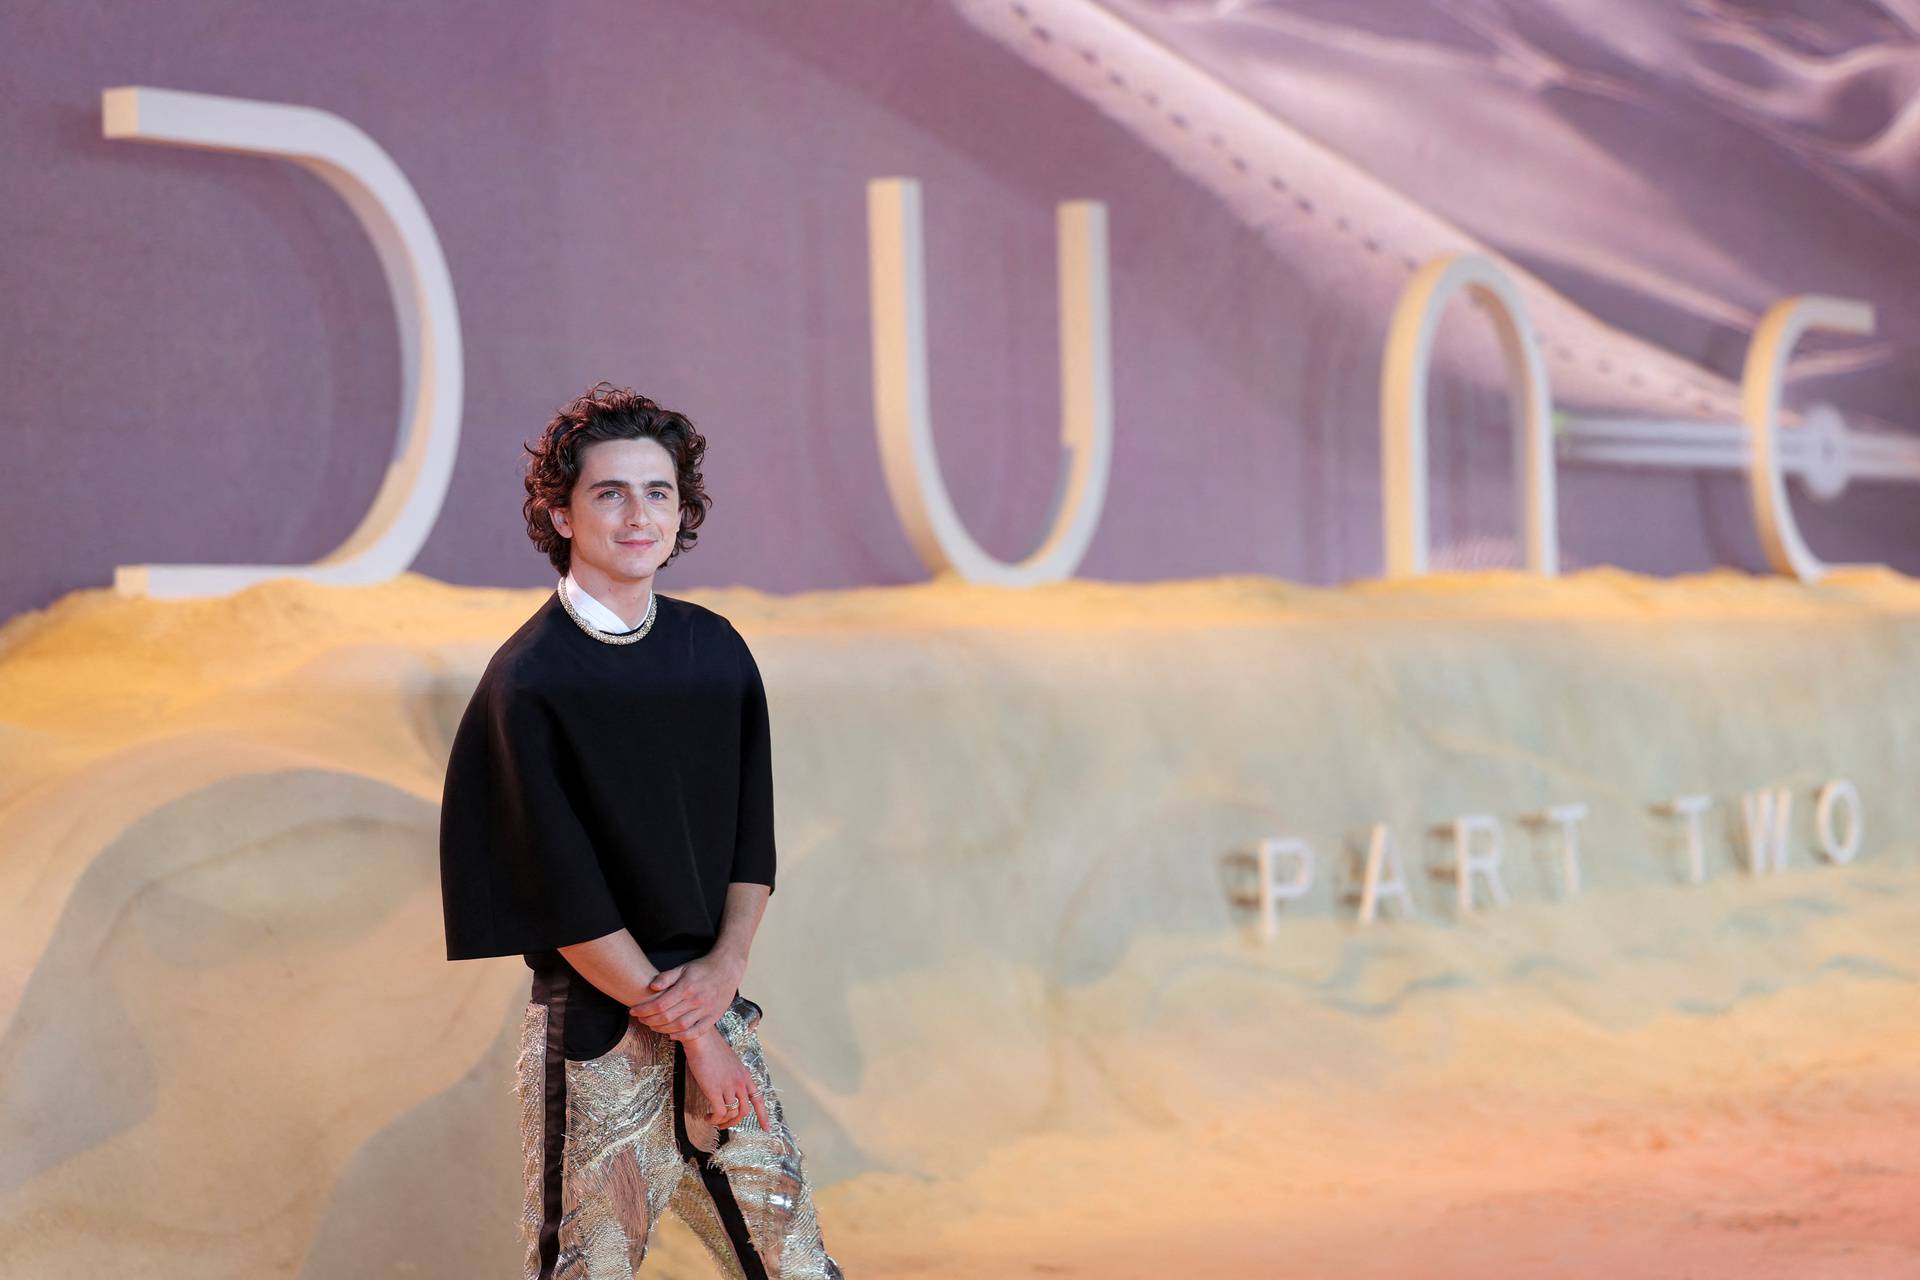 World premiere of the film "Dune: Part Two", in London